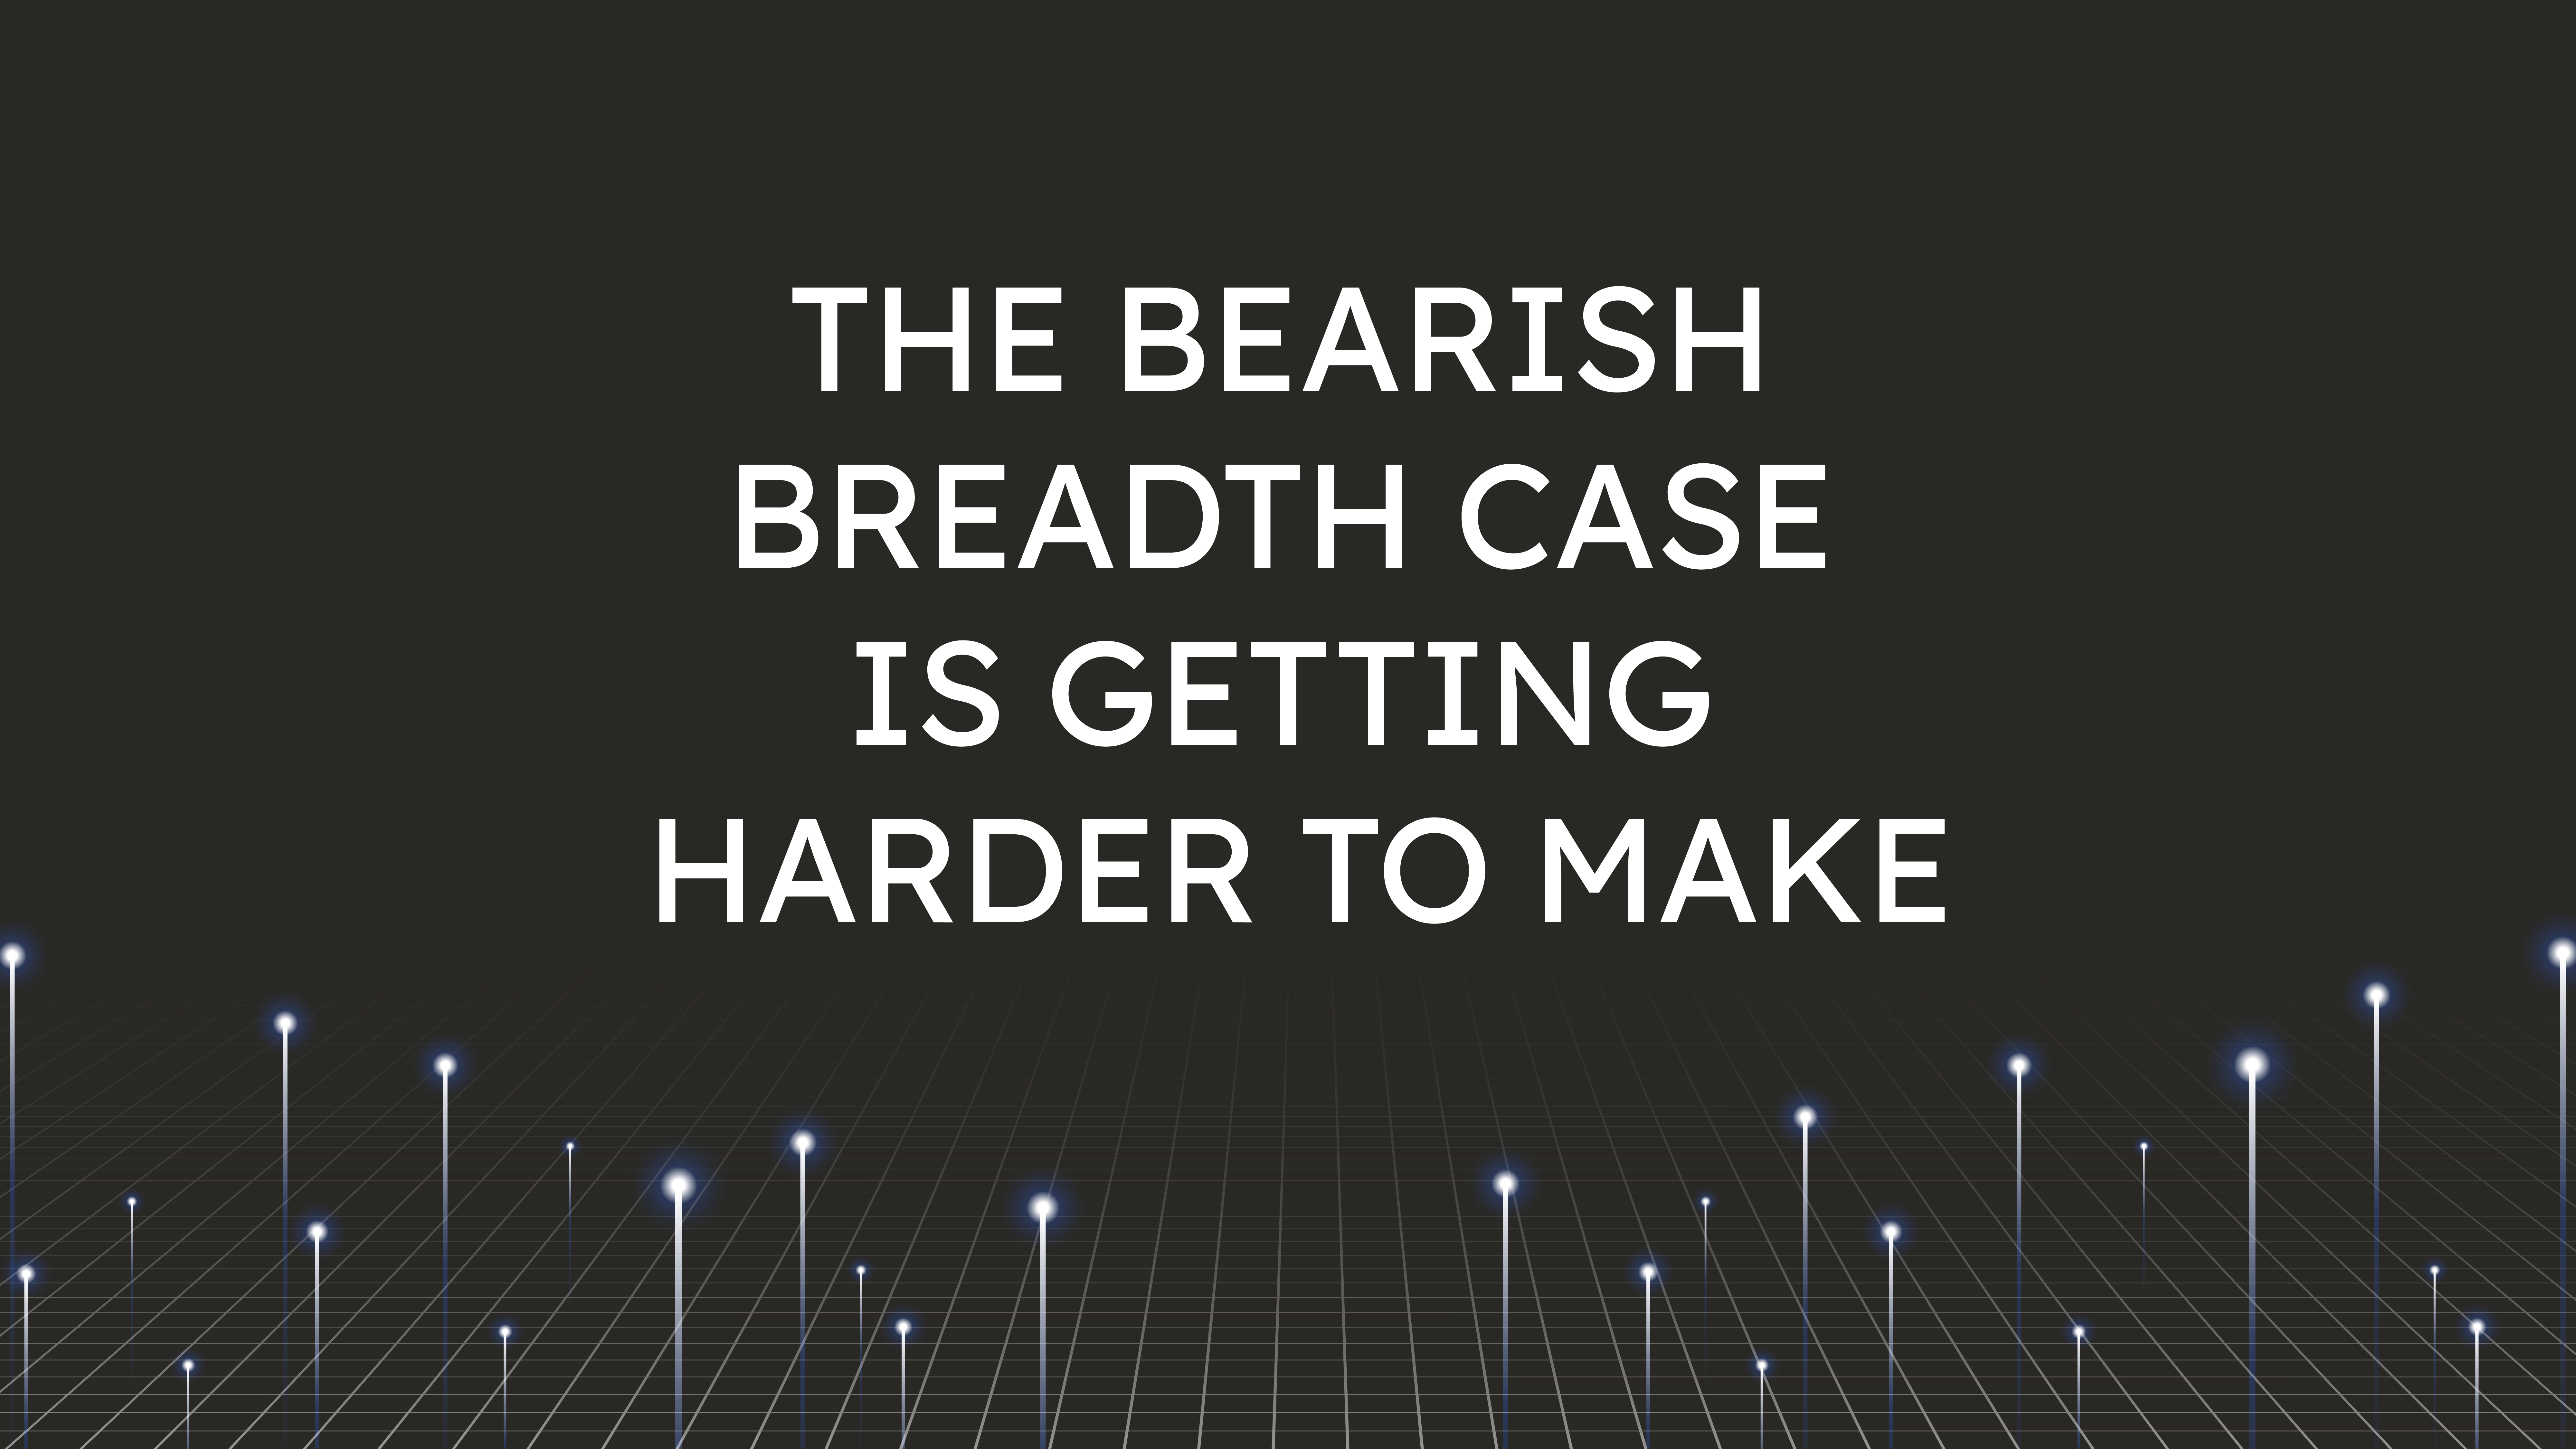 The Bearish Breadth Case  is Getting Harder to Make